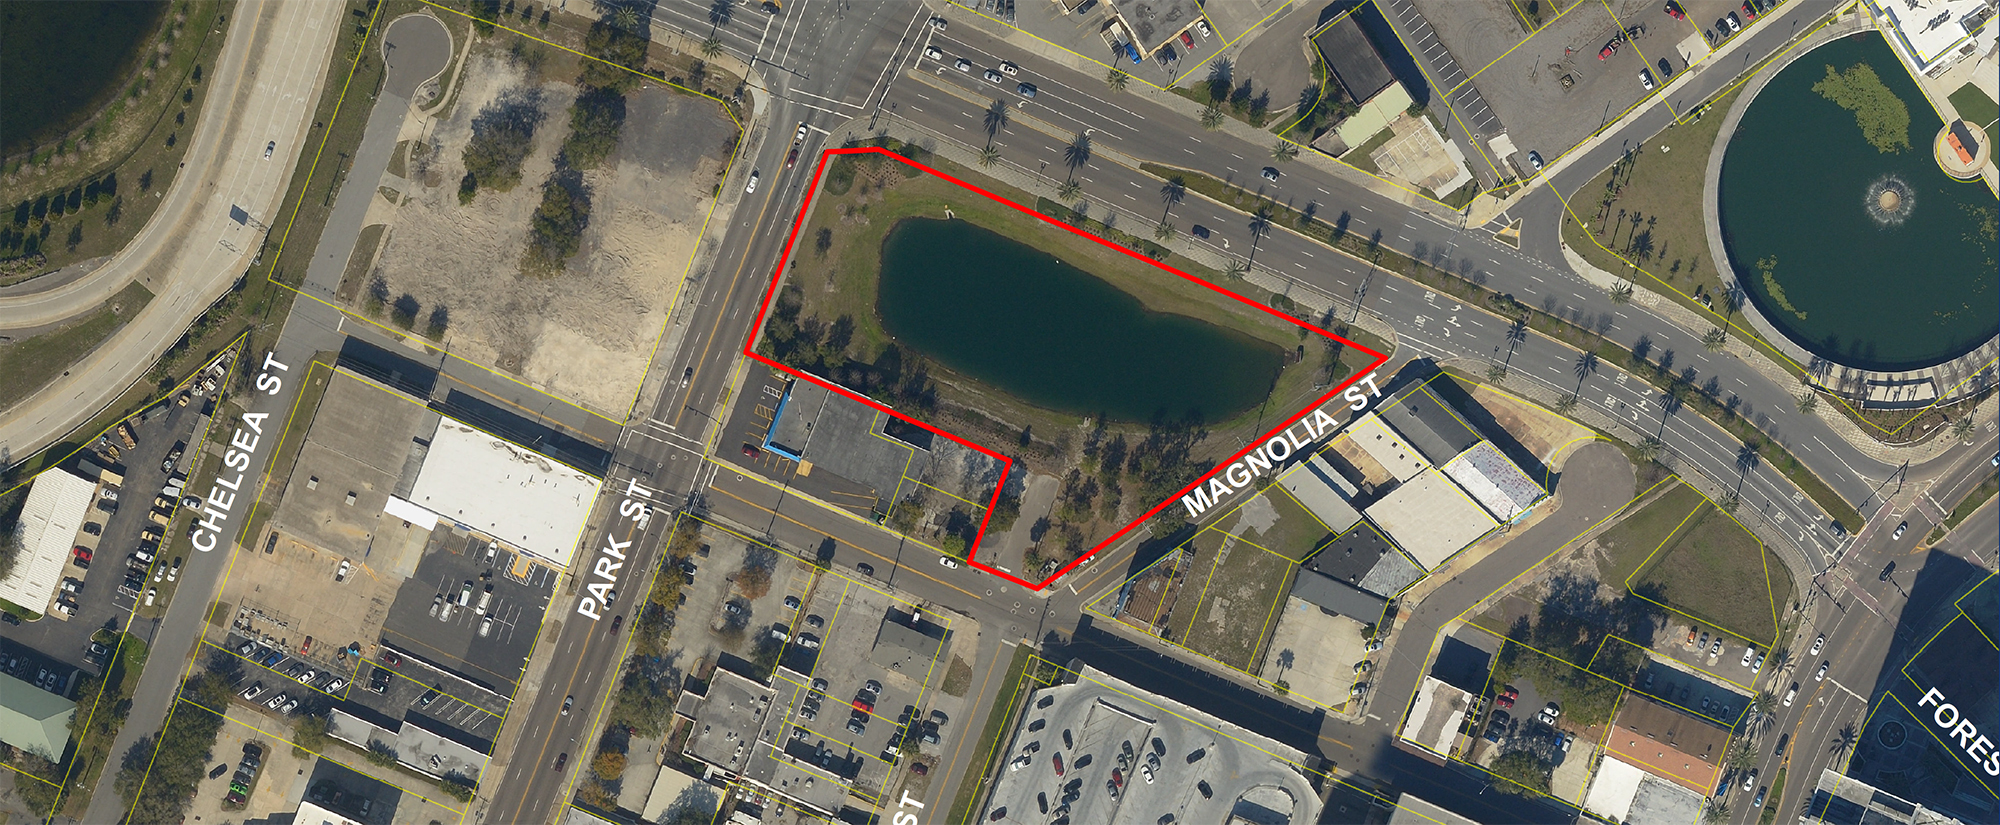 Resolution 2019-08-02, also under consideration Wednesday, would provide Blue Cross & Blue Shield of Florida Inc., which does business as Florida Blue, a $3.5 million grant to build a 750-space parking garage two blocks west on Magnolia Street. 